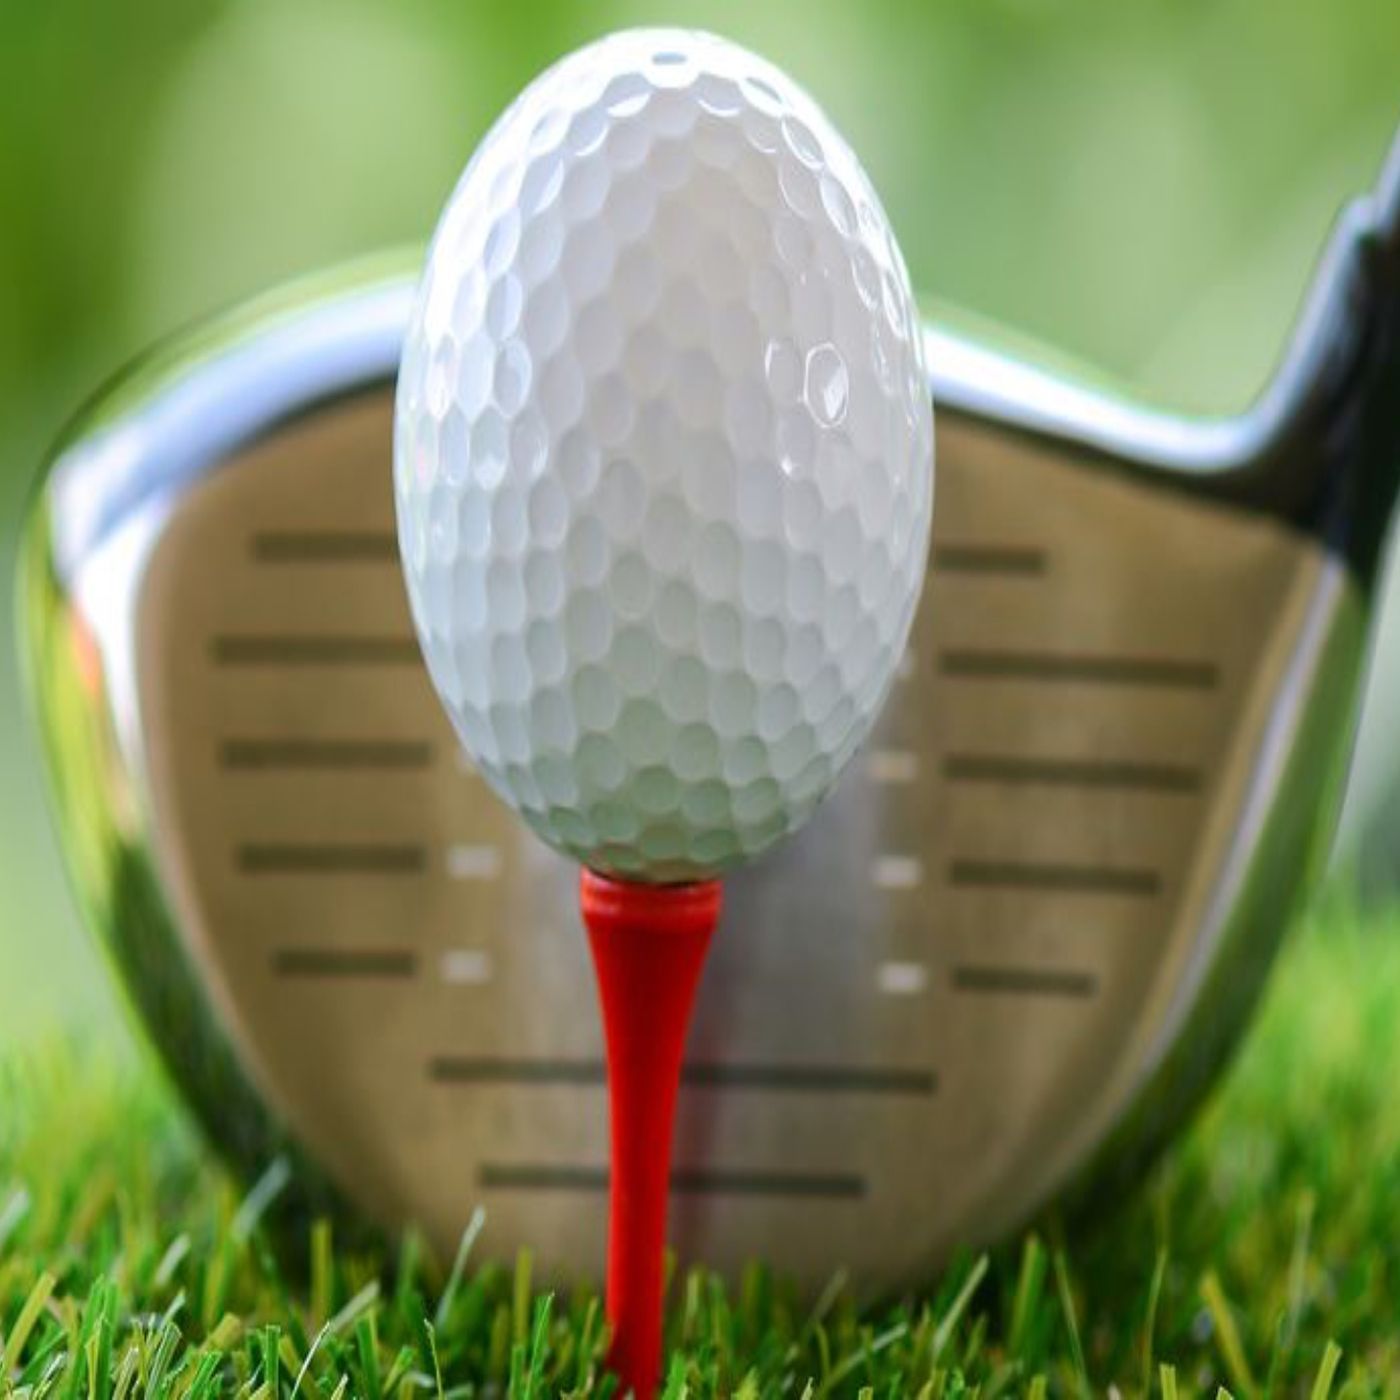 Has the game of golf become too hard hitting?